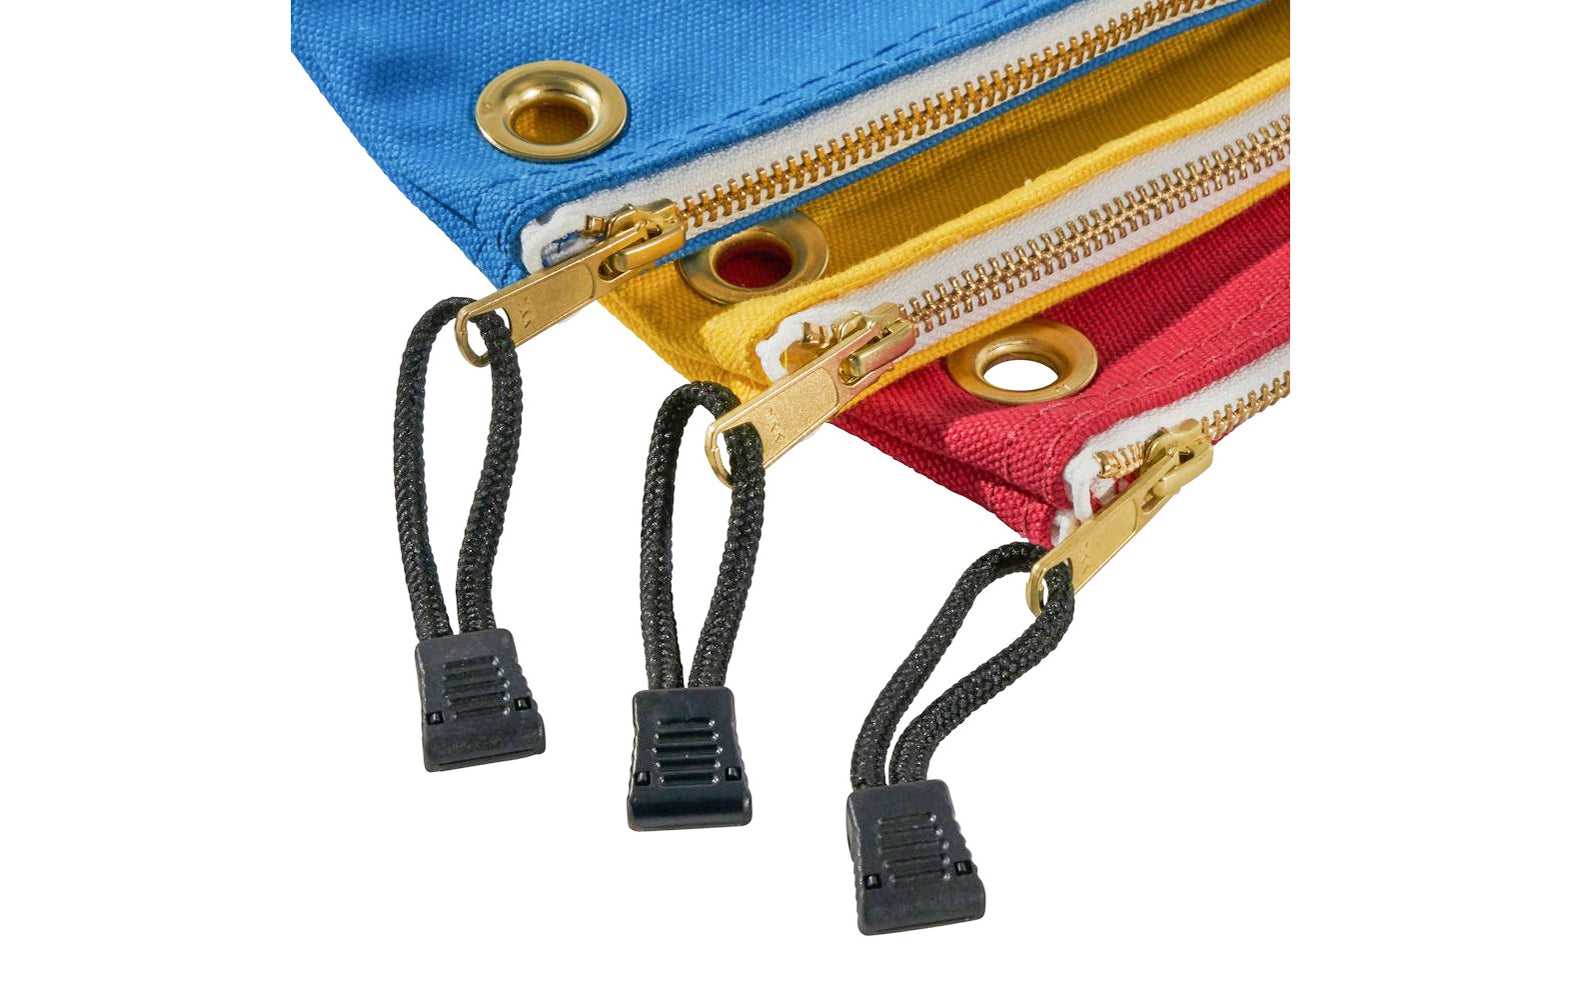 The Klein Tools 3-Pack Canvas Zipper Bags, Consumables bags are perfect for storing wire nuts, connectors, & other consumables. A brass grommet makes this bag easy to hang or attach to a belt or clip. Brightly colored for easy identification & convenience.  Made in USA. 5539CPAK